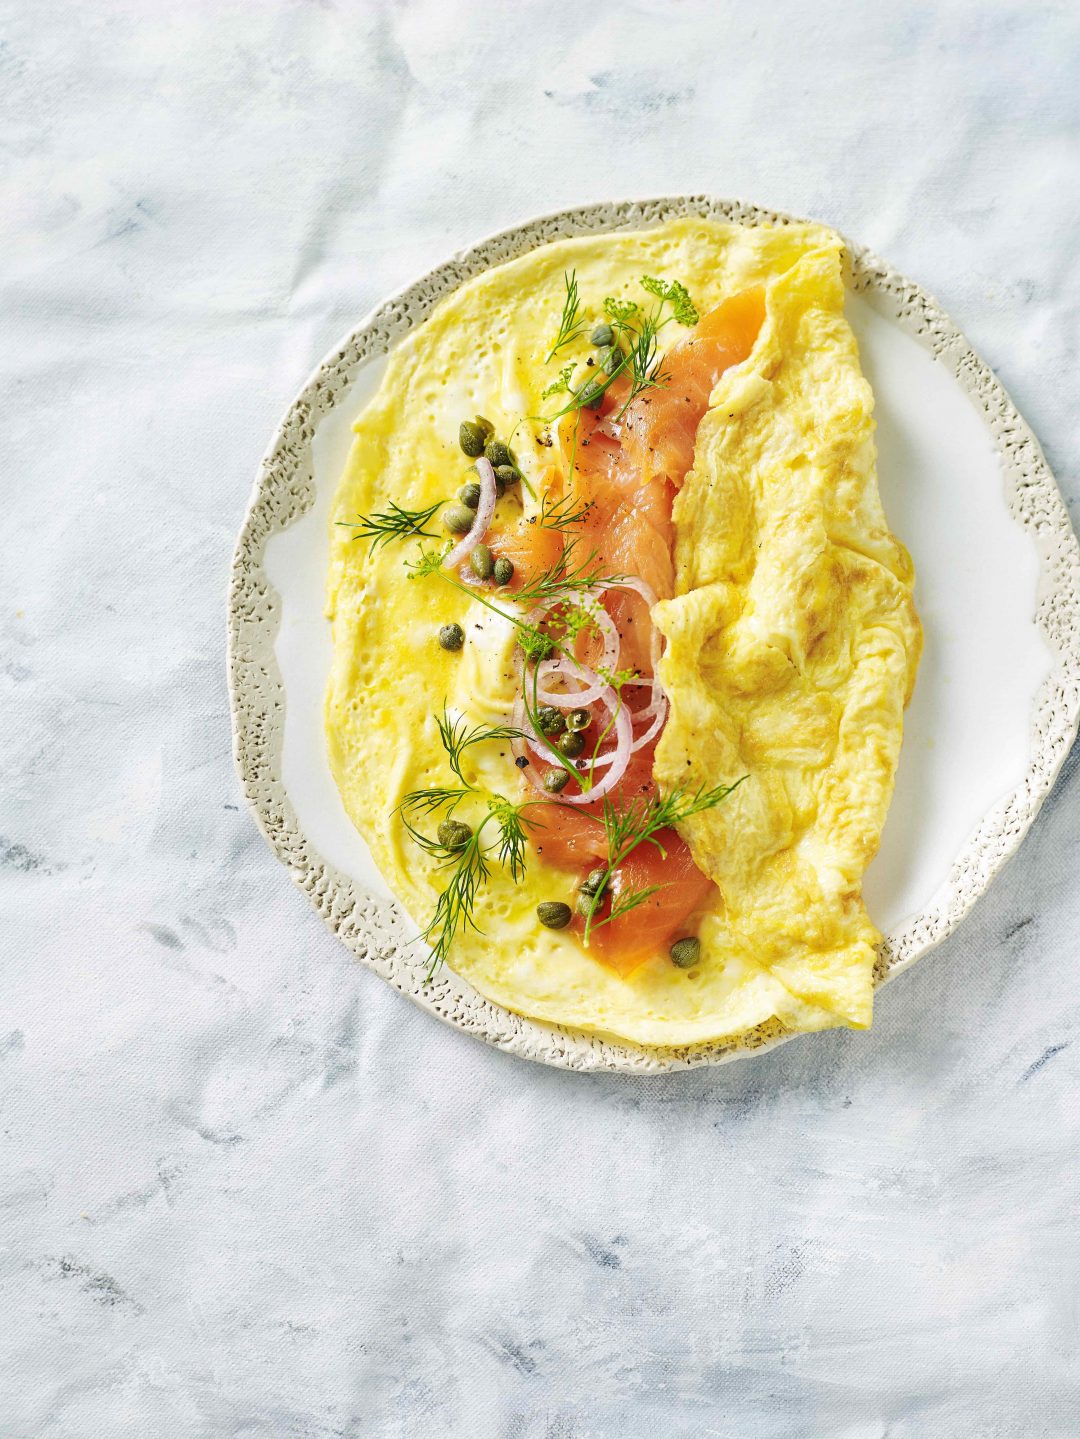 Smoked salmon ,dill & capers omlette